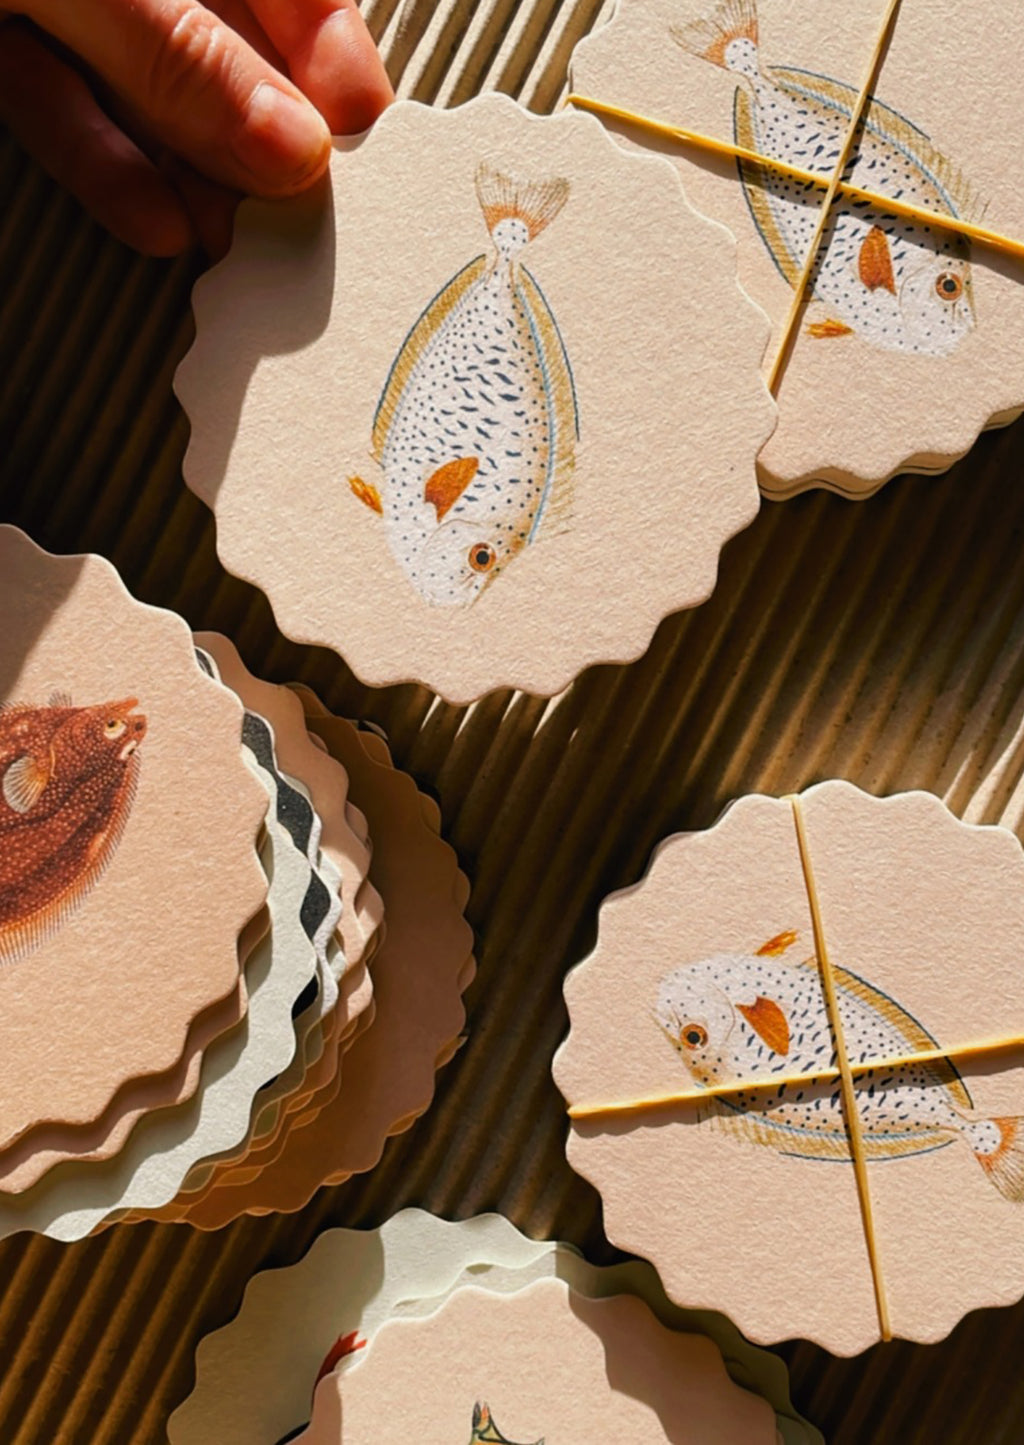 Fish: A set of scalloped edge paper coasters with 10 different fish prints.